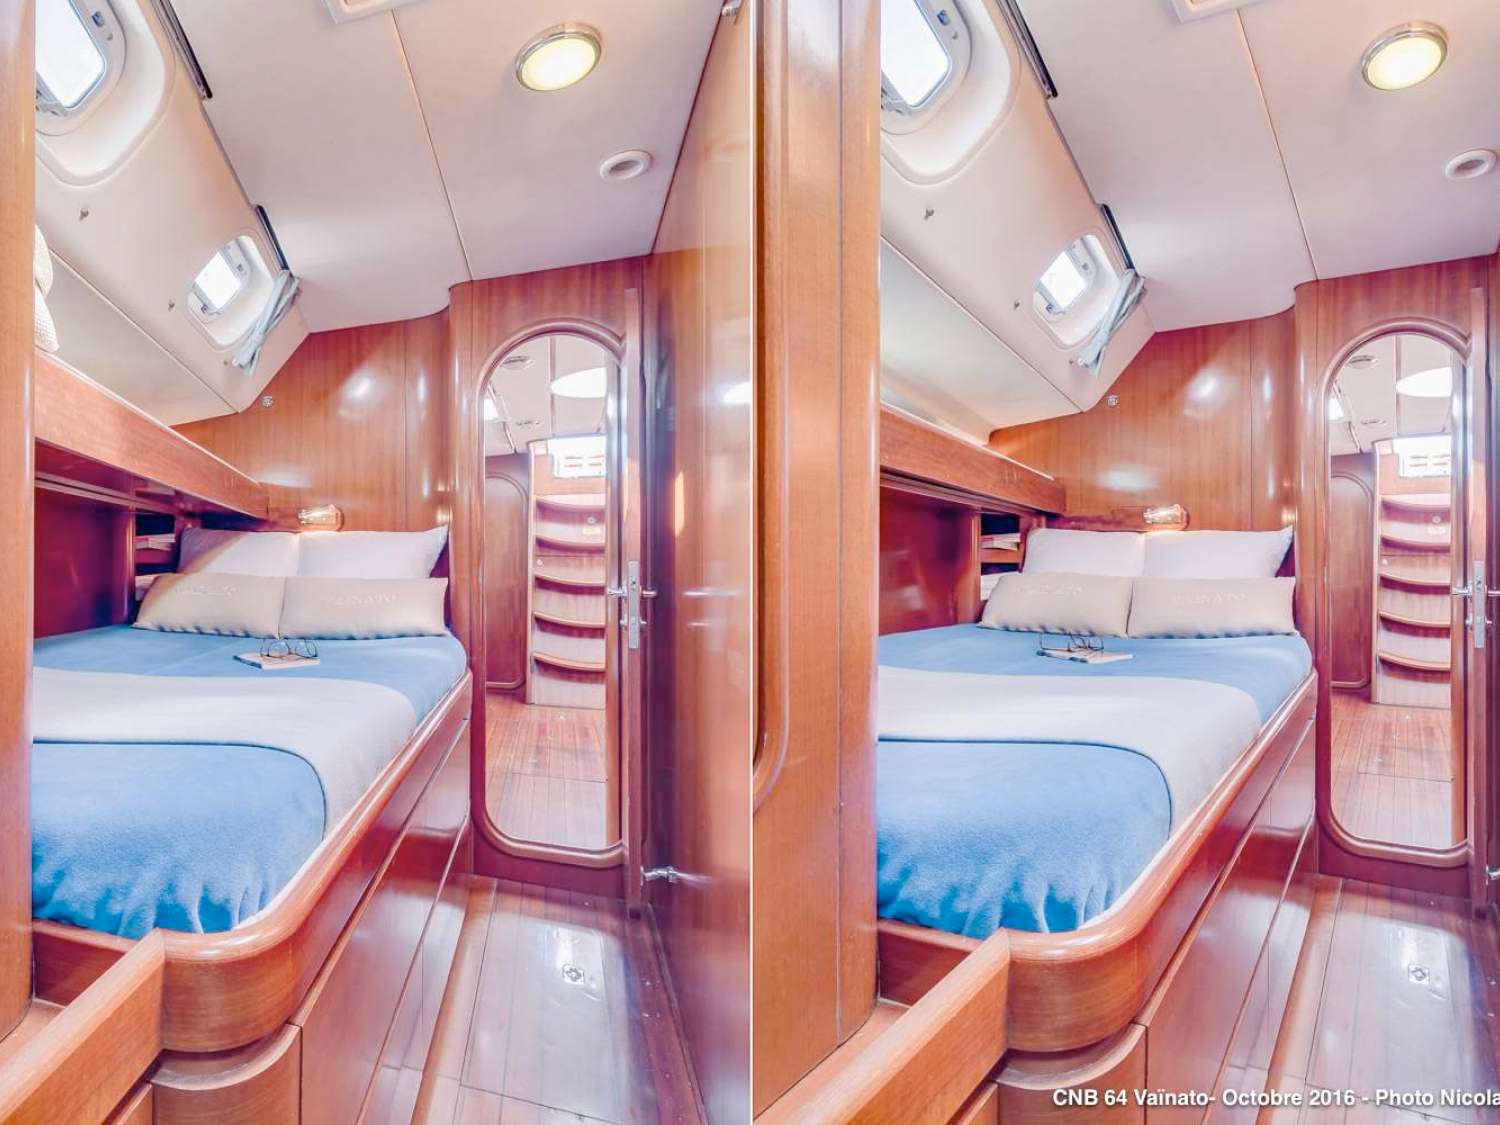 Starboard cabin with &amp; without bunkbed